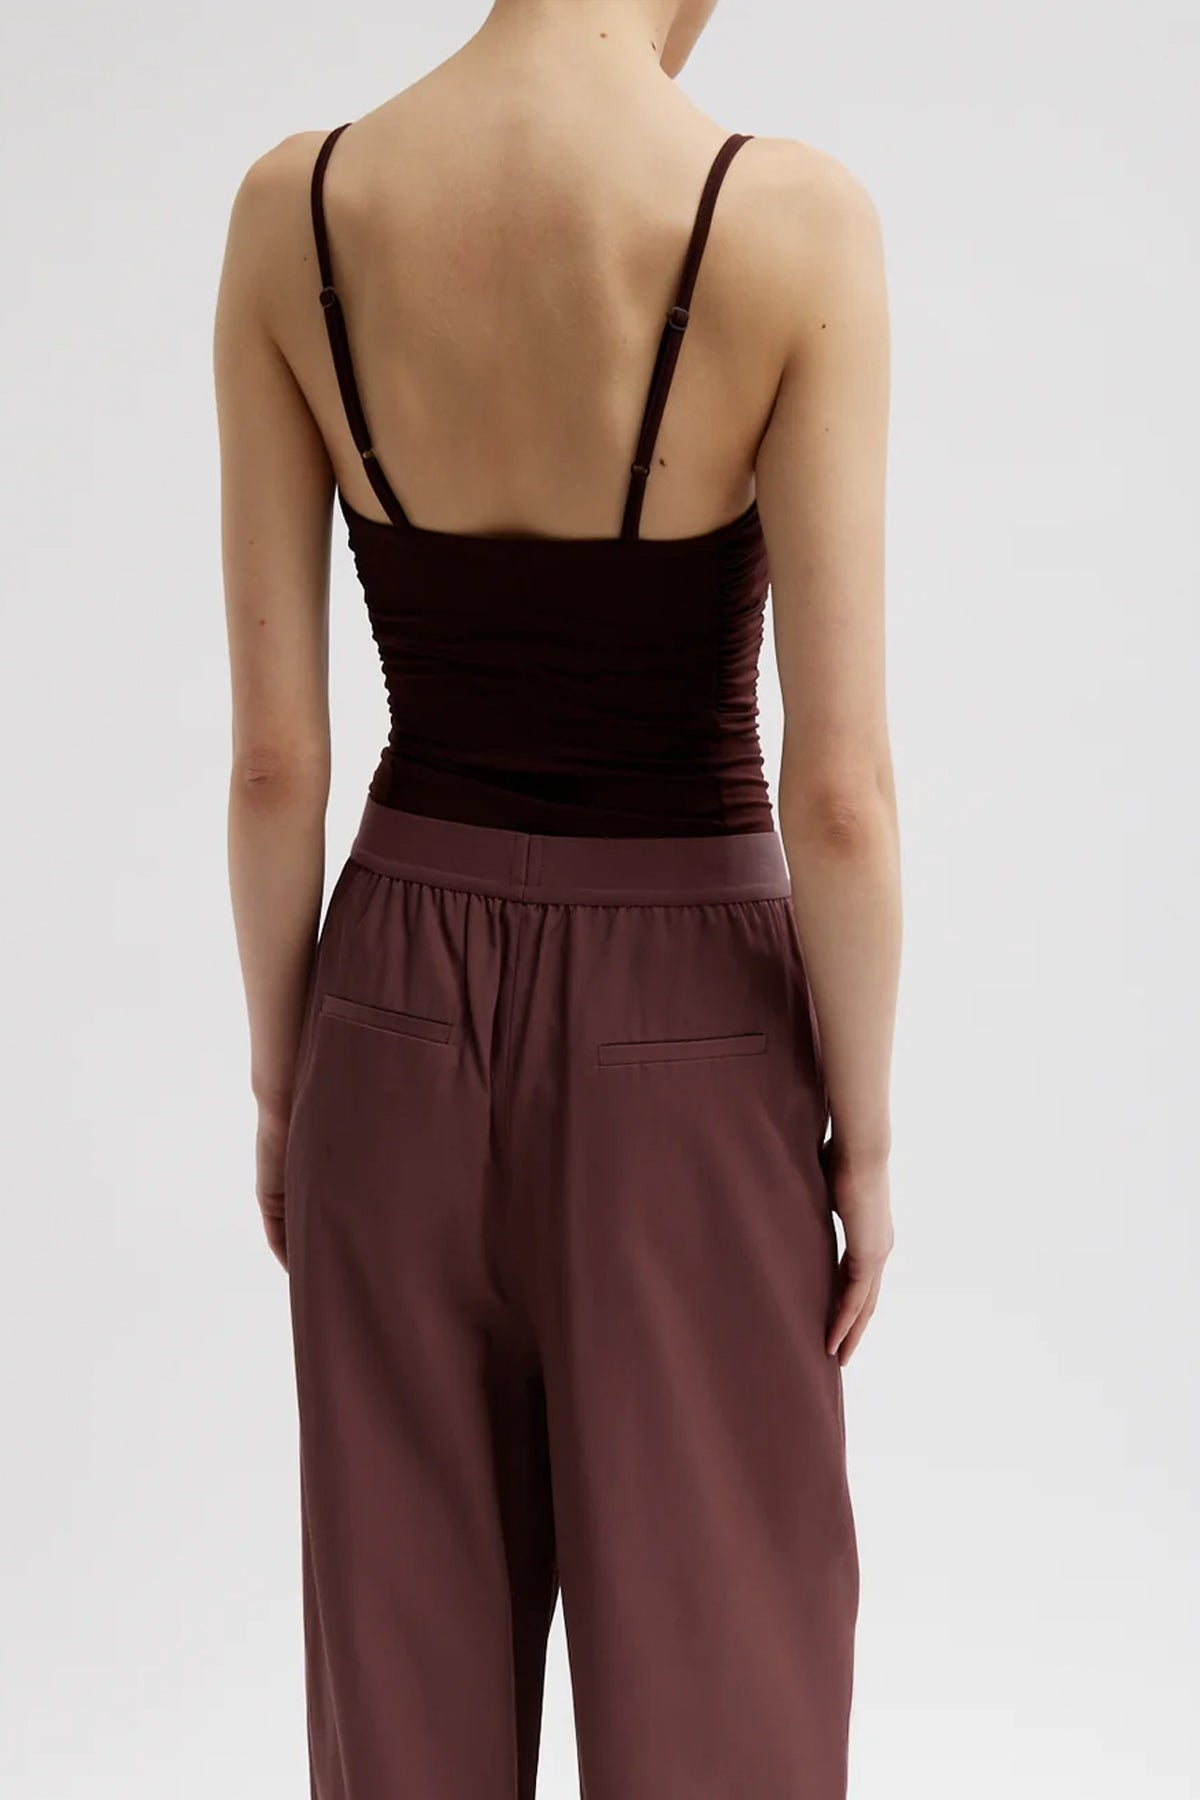 Stretch Light Weight Tech Knit Shirred Cami in Brown - shop-olivia.com